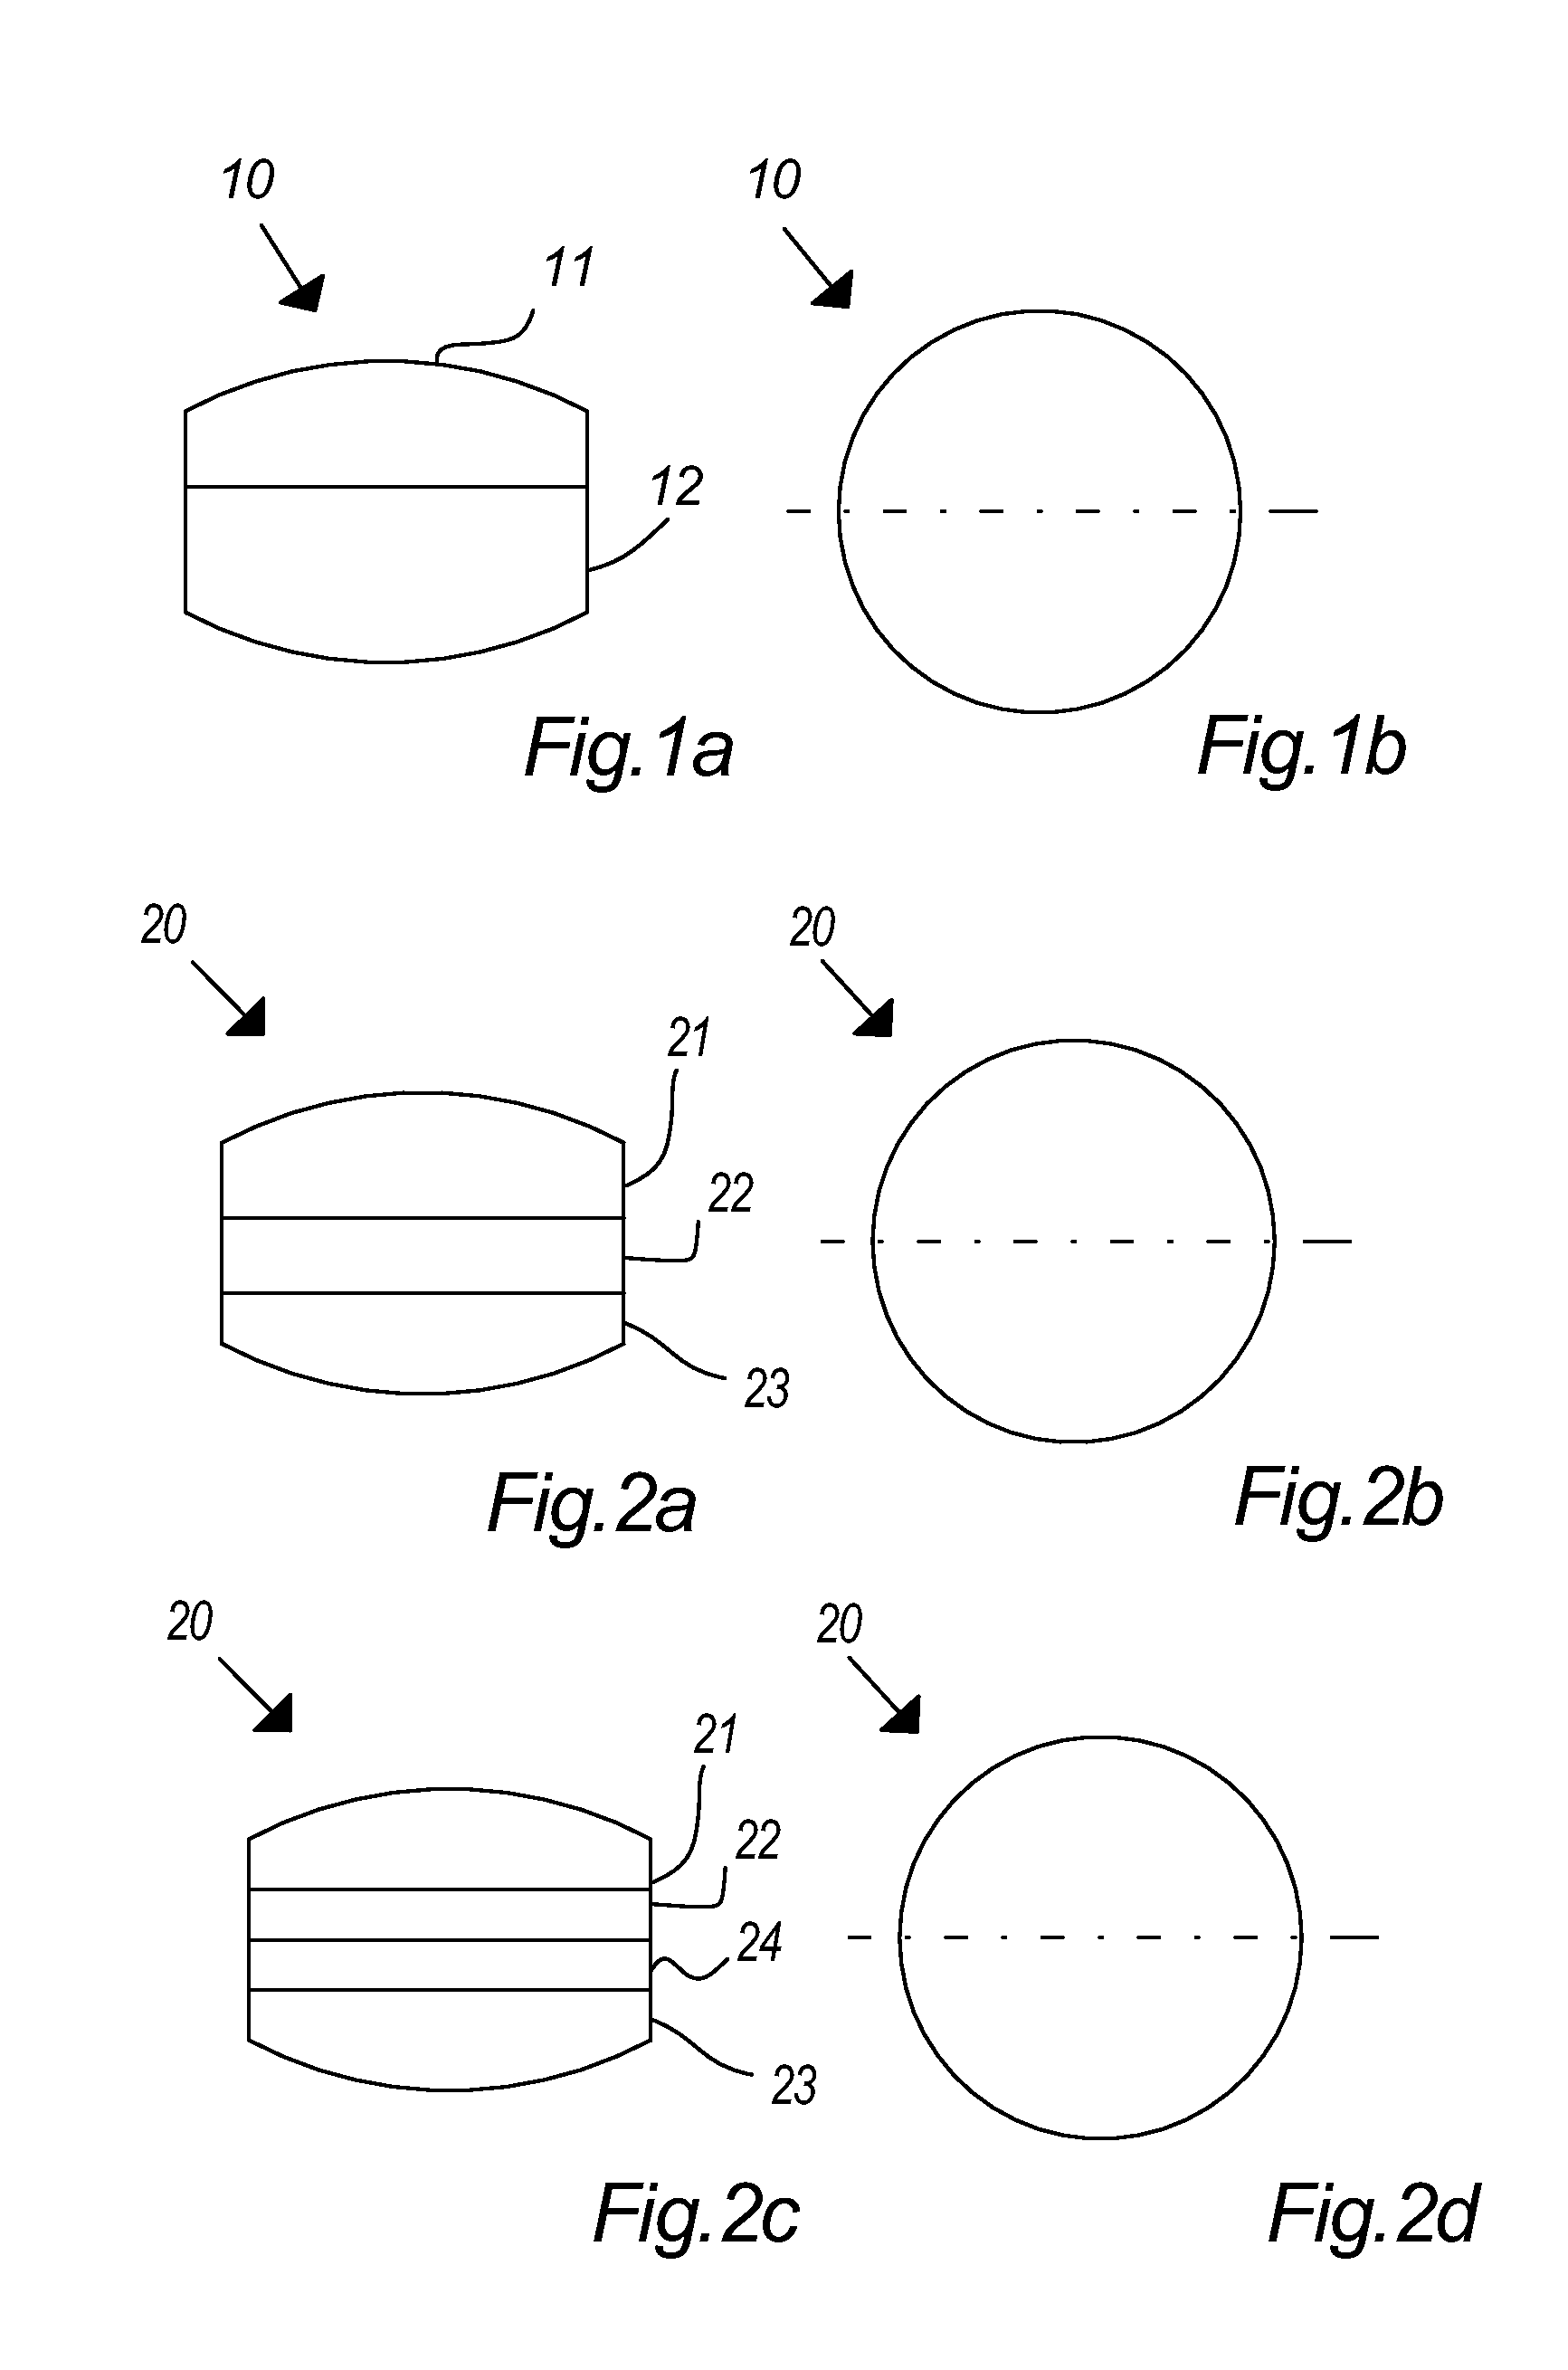 Chewing Gum Tablet And Method Of Dosing Pharmaceutically Active Ingredients In Such Chewing Gum Tablet